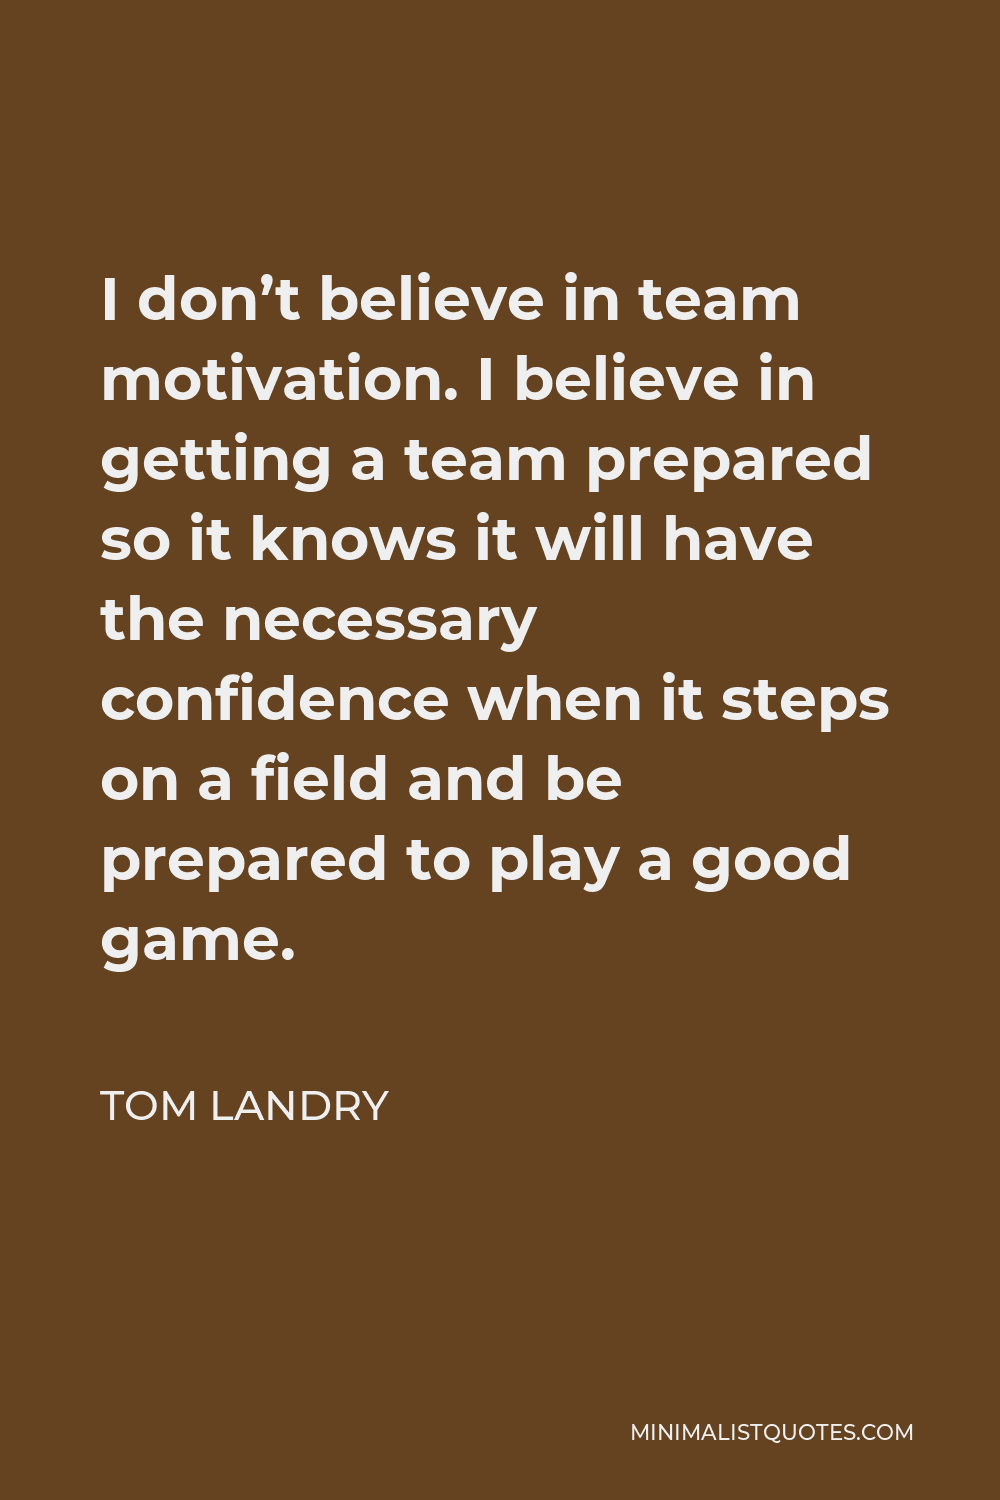 Tom Landry Quote: I don't believe in team motivation. I believe in ...